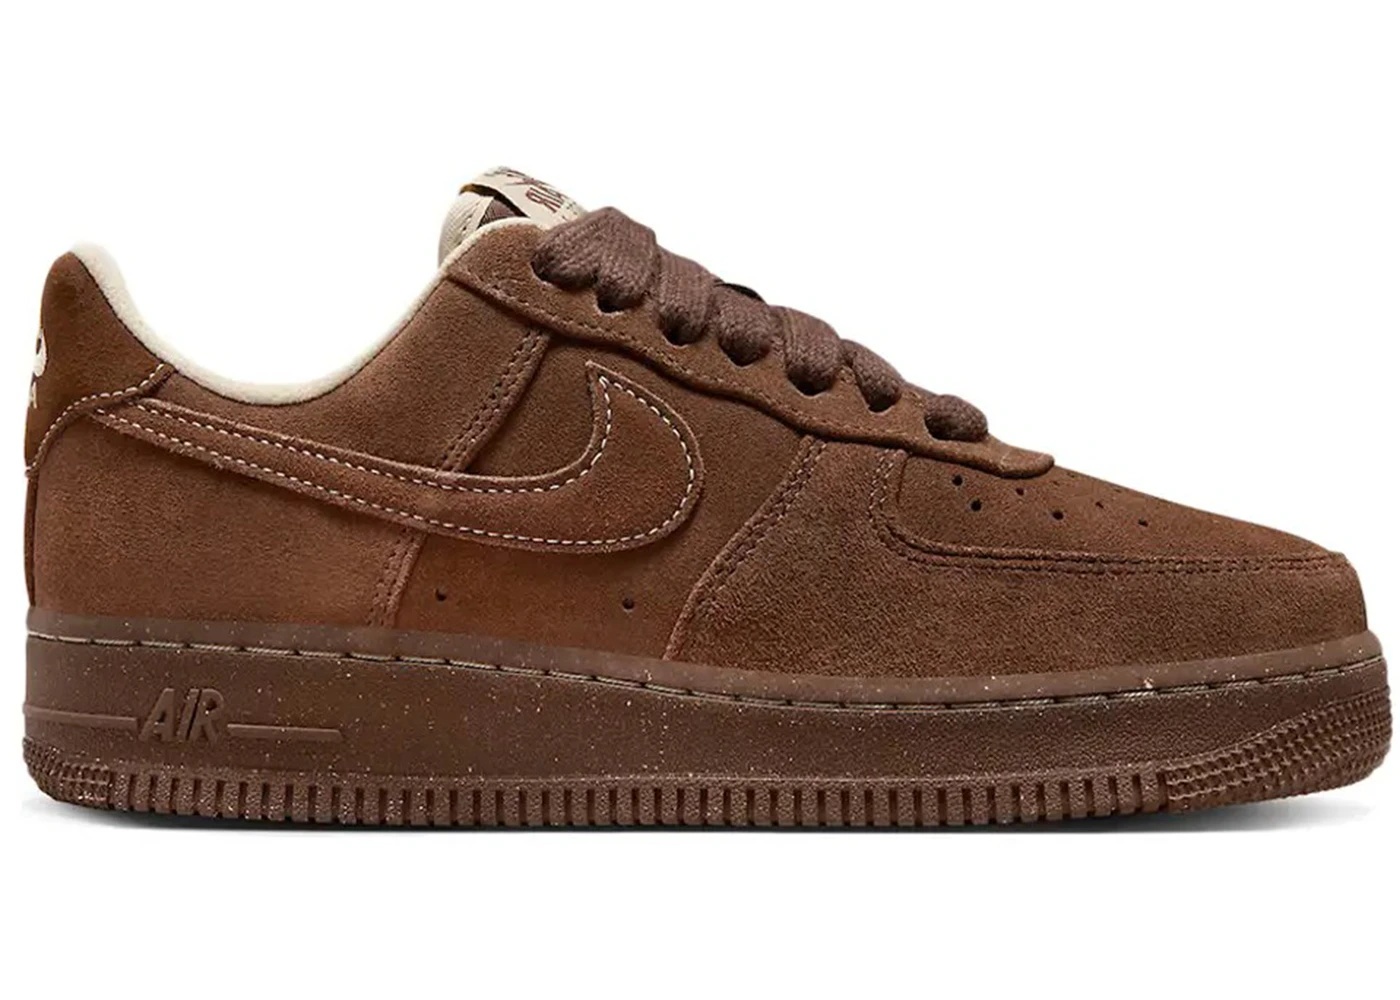 Nike Air Force 1 Low '07 Suede Cacao Wow (Women's) - 1